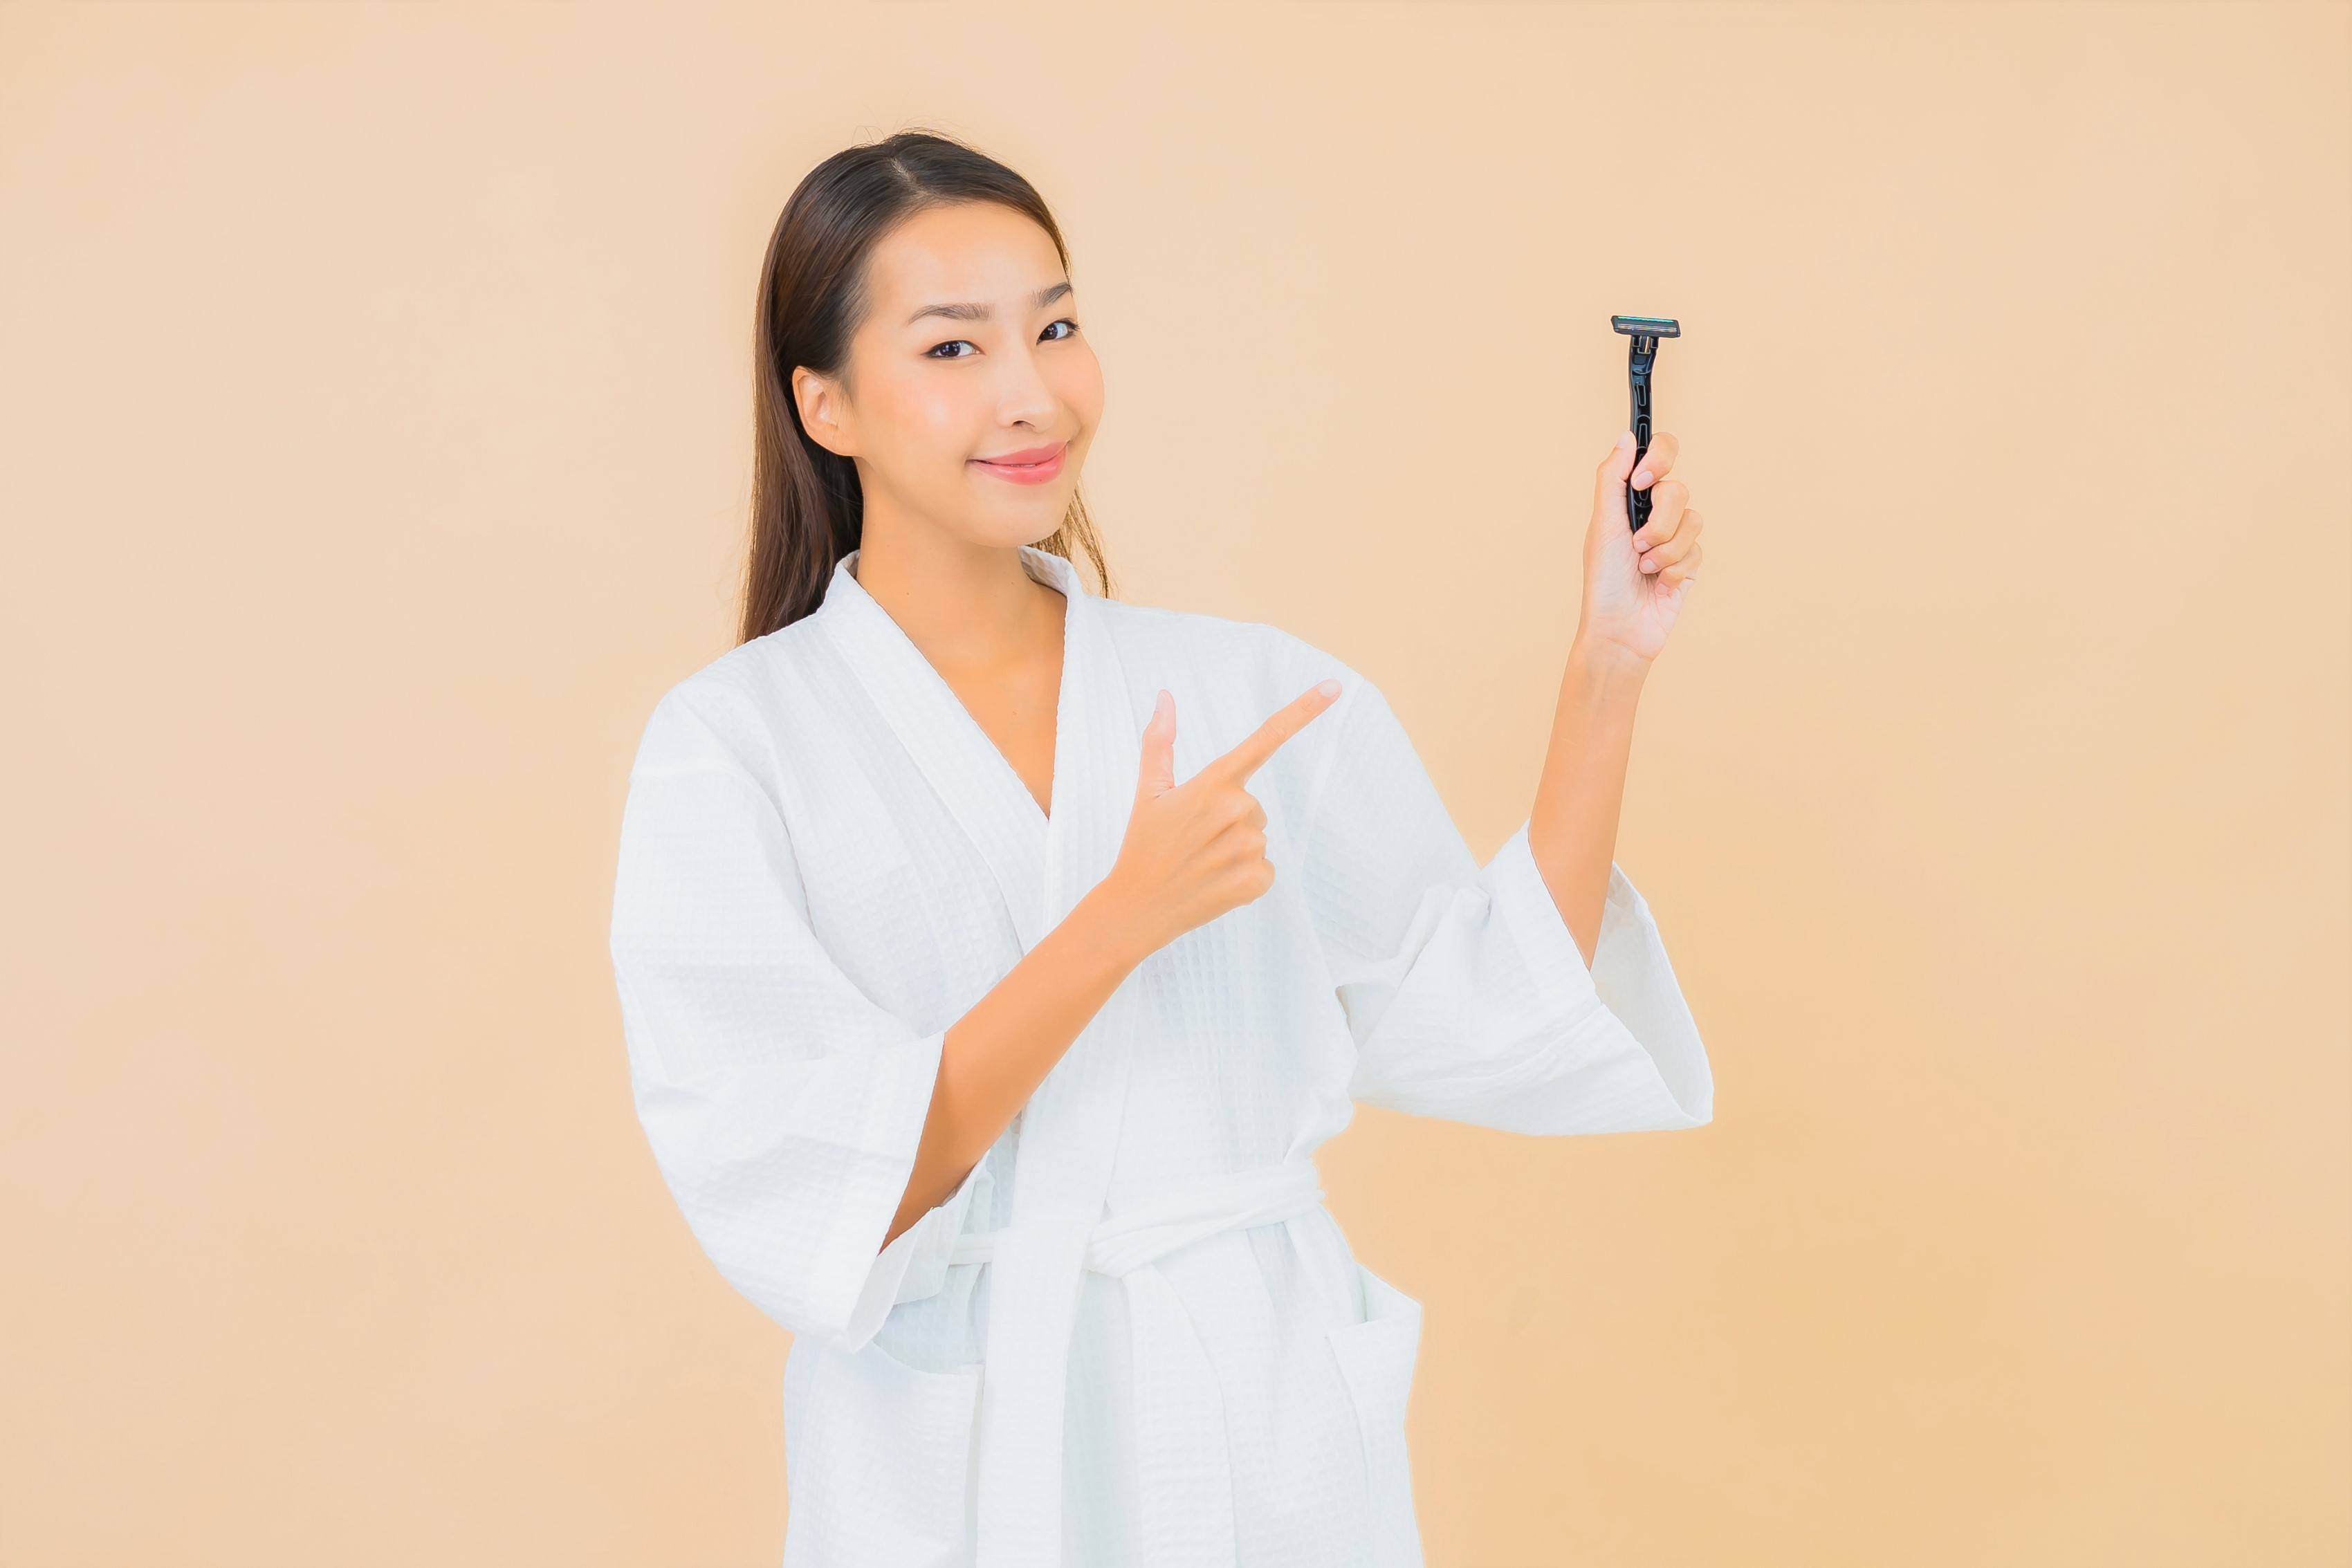 The Ultimate Guide to Face Shaving for Women